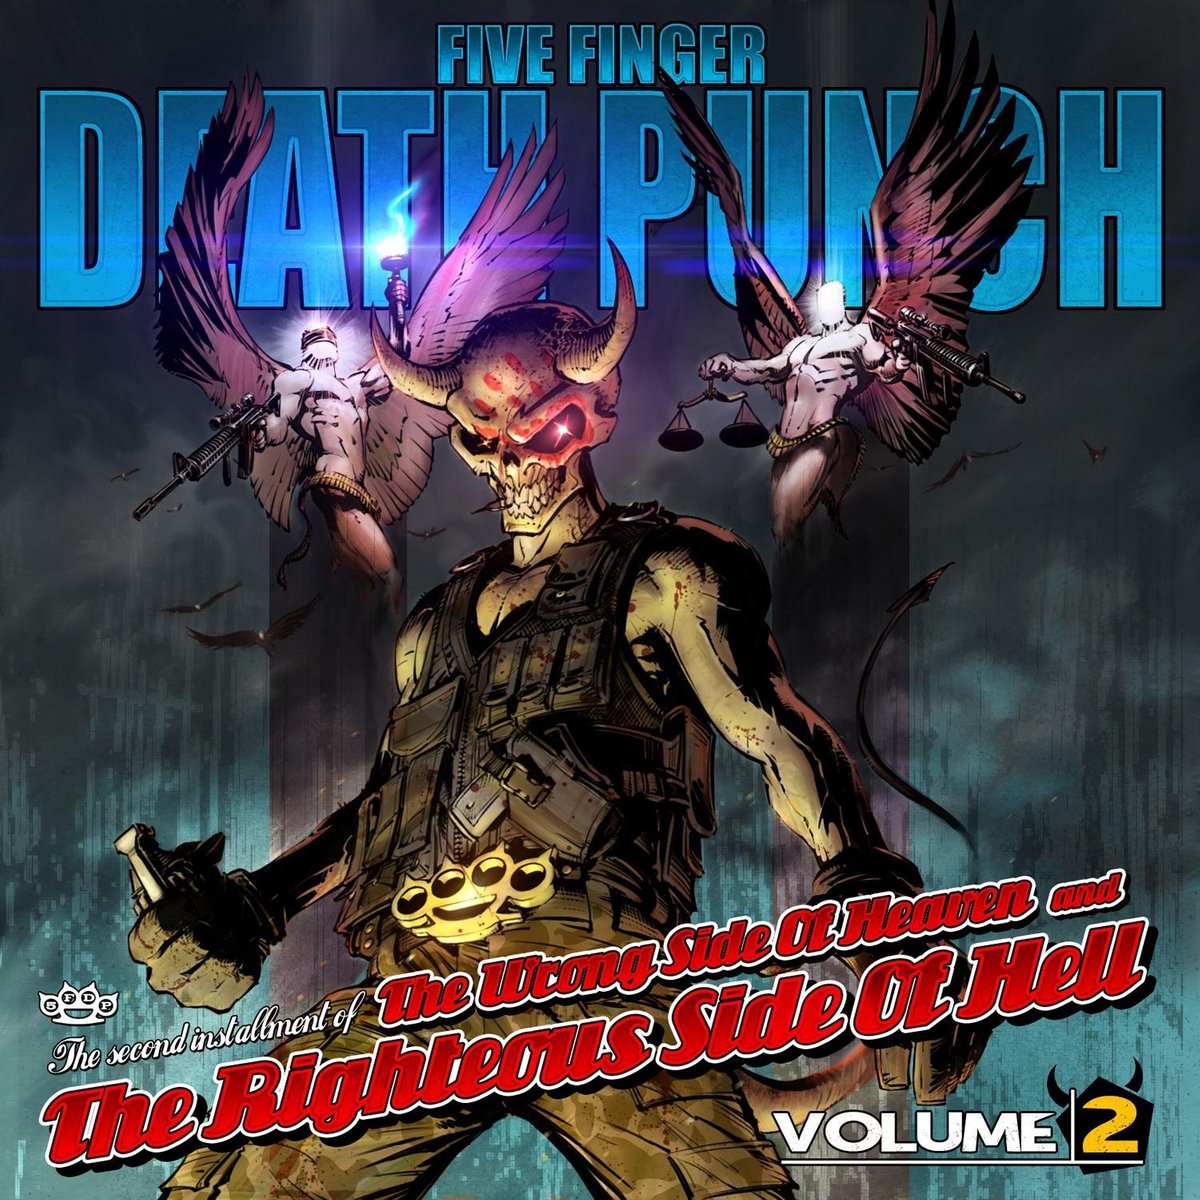 Five Finger Death Punch - The Wrong Side Of Heavy and The Right Side Of Hell - Volume 2 (Deluxe Edition)(CD+DVD)